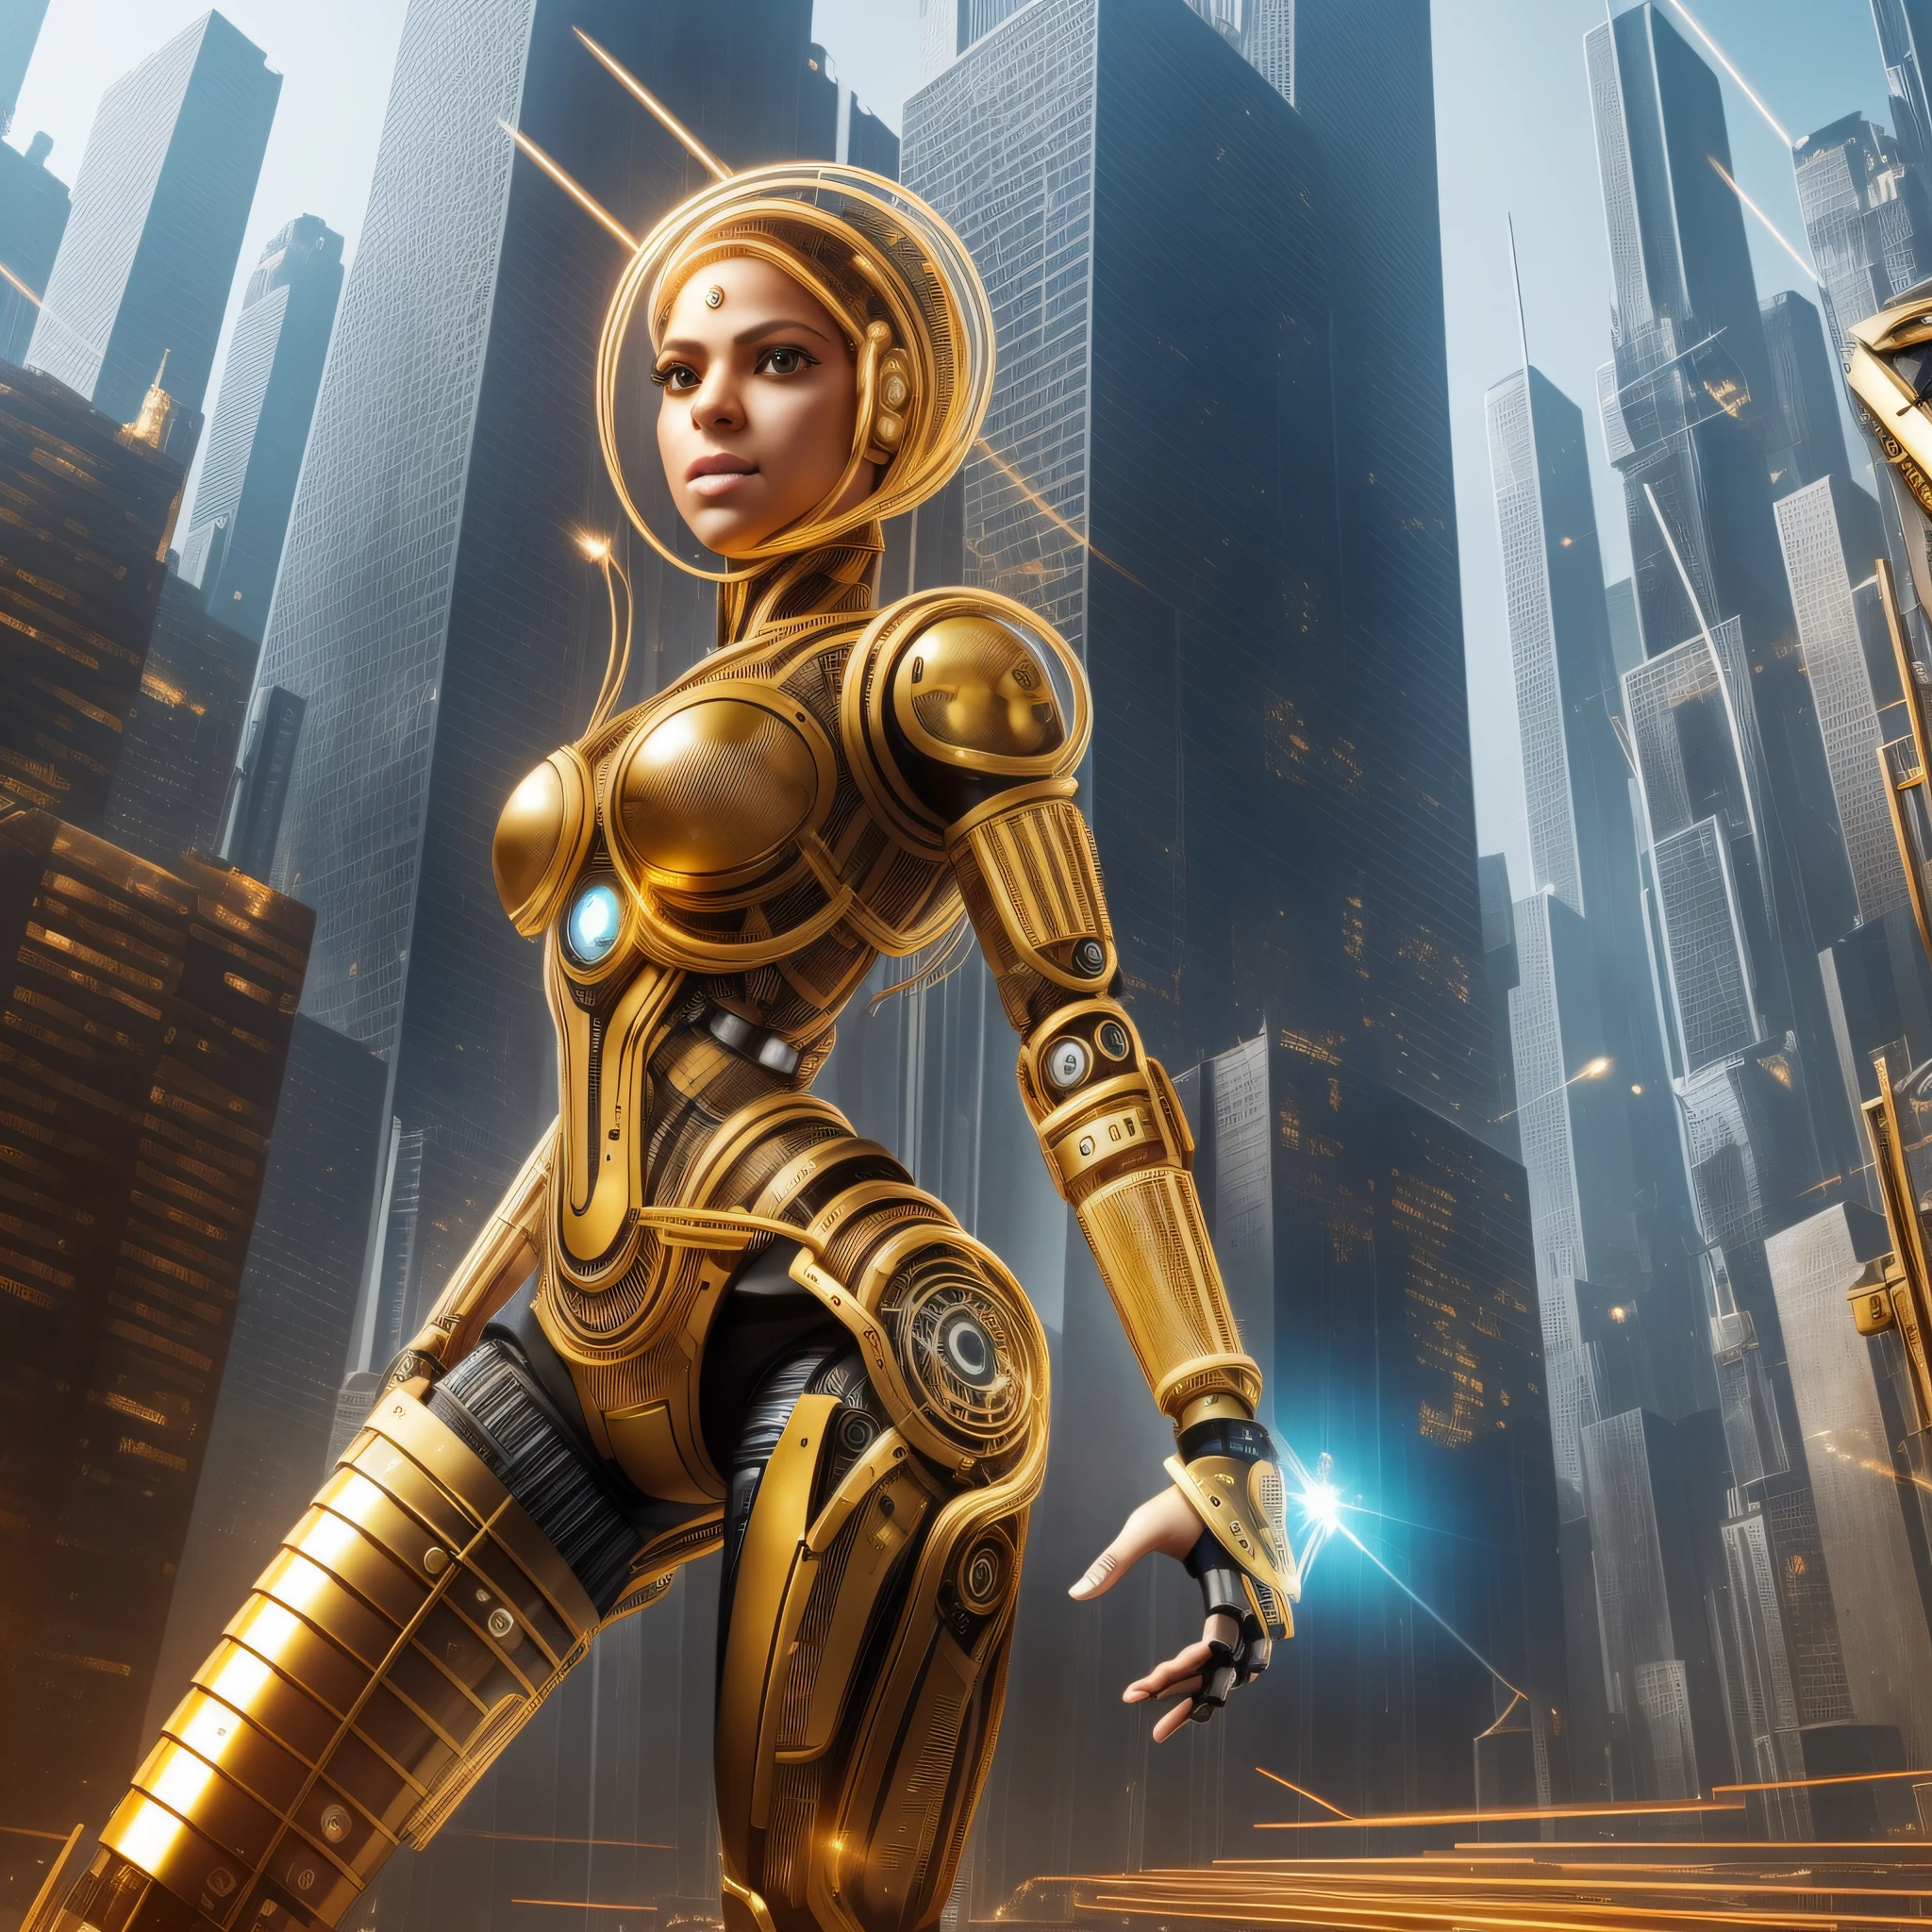 1 android woman, Shakira's face, with metal parts by the body, robotic arms and legs, golden wires and gears by the body, micro chips on the face, futuristic city background,